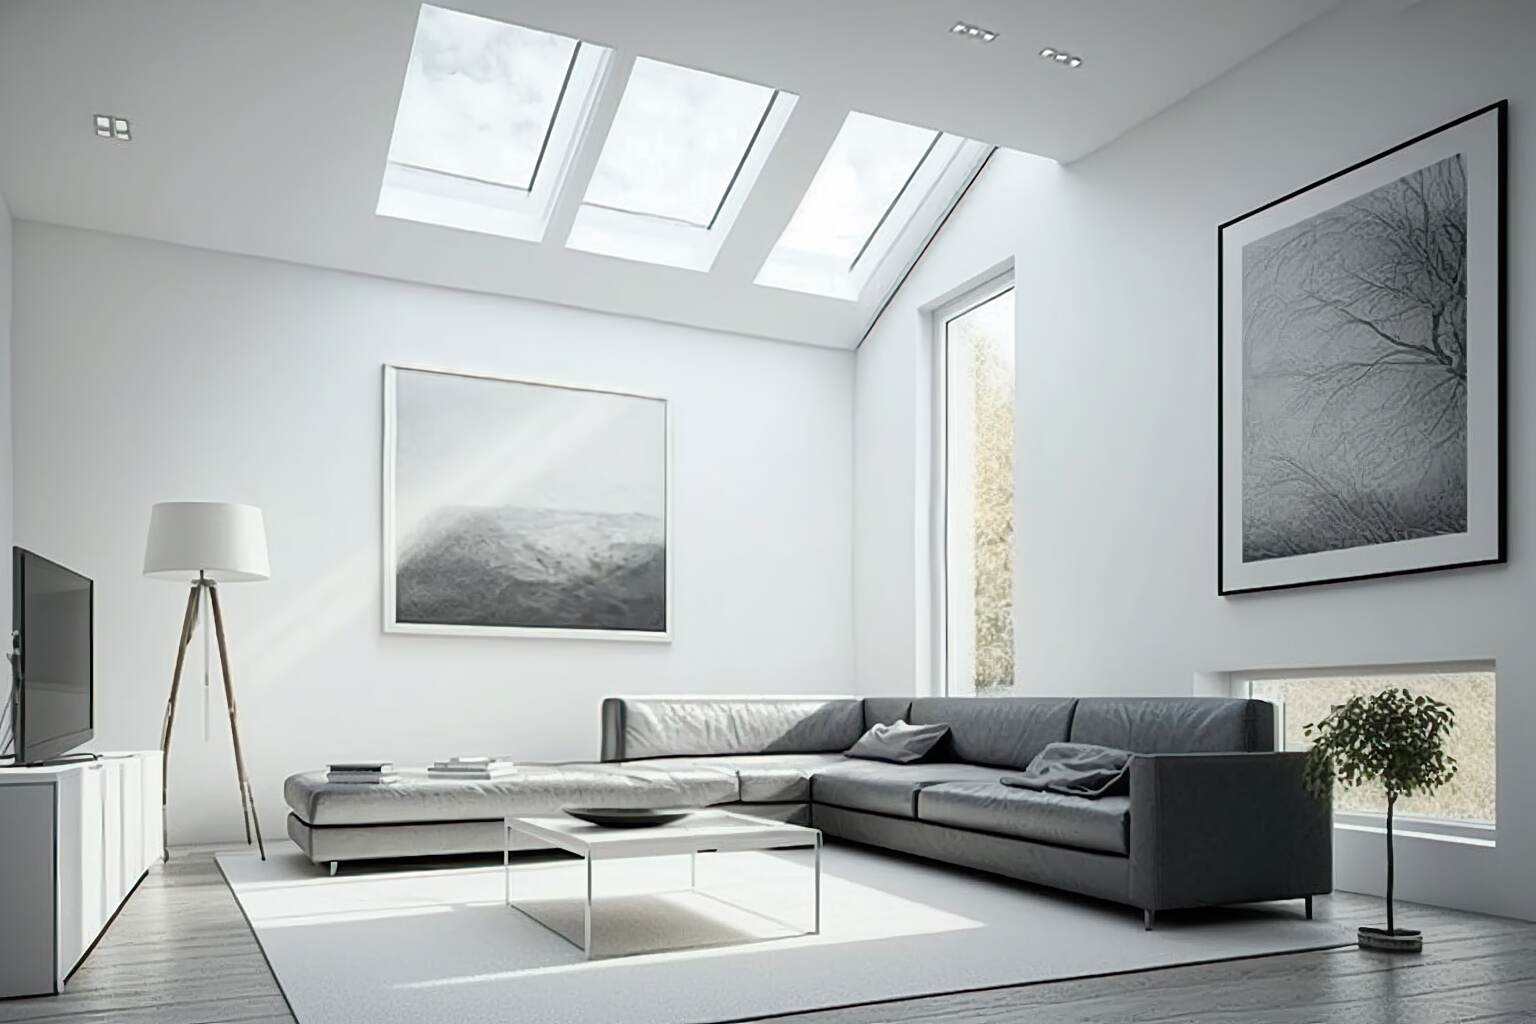 Modern Minimalist Living Room With A Skylight That Illuminates The Room With Natural Light